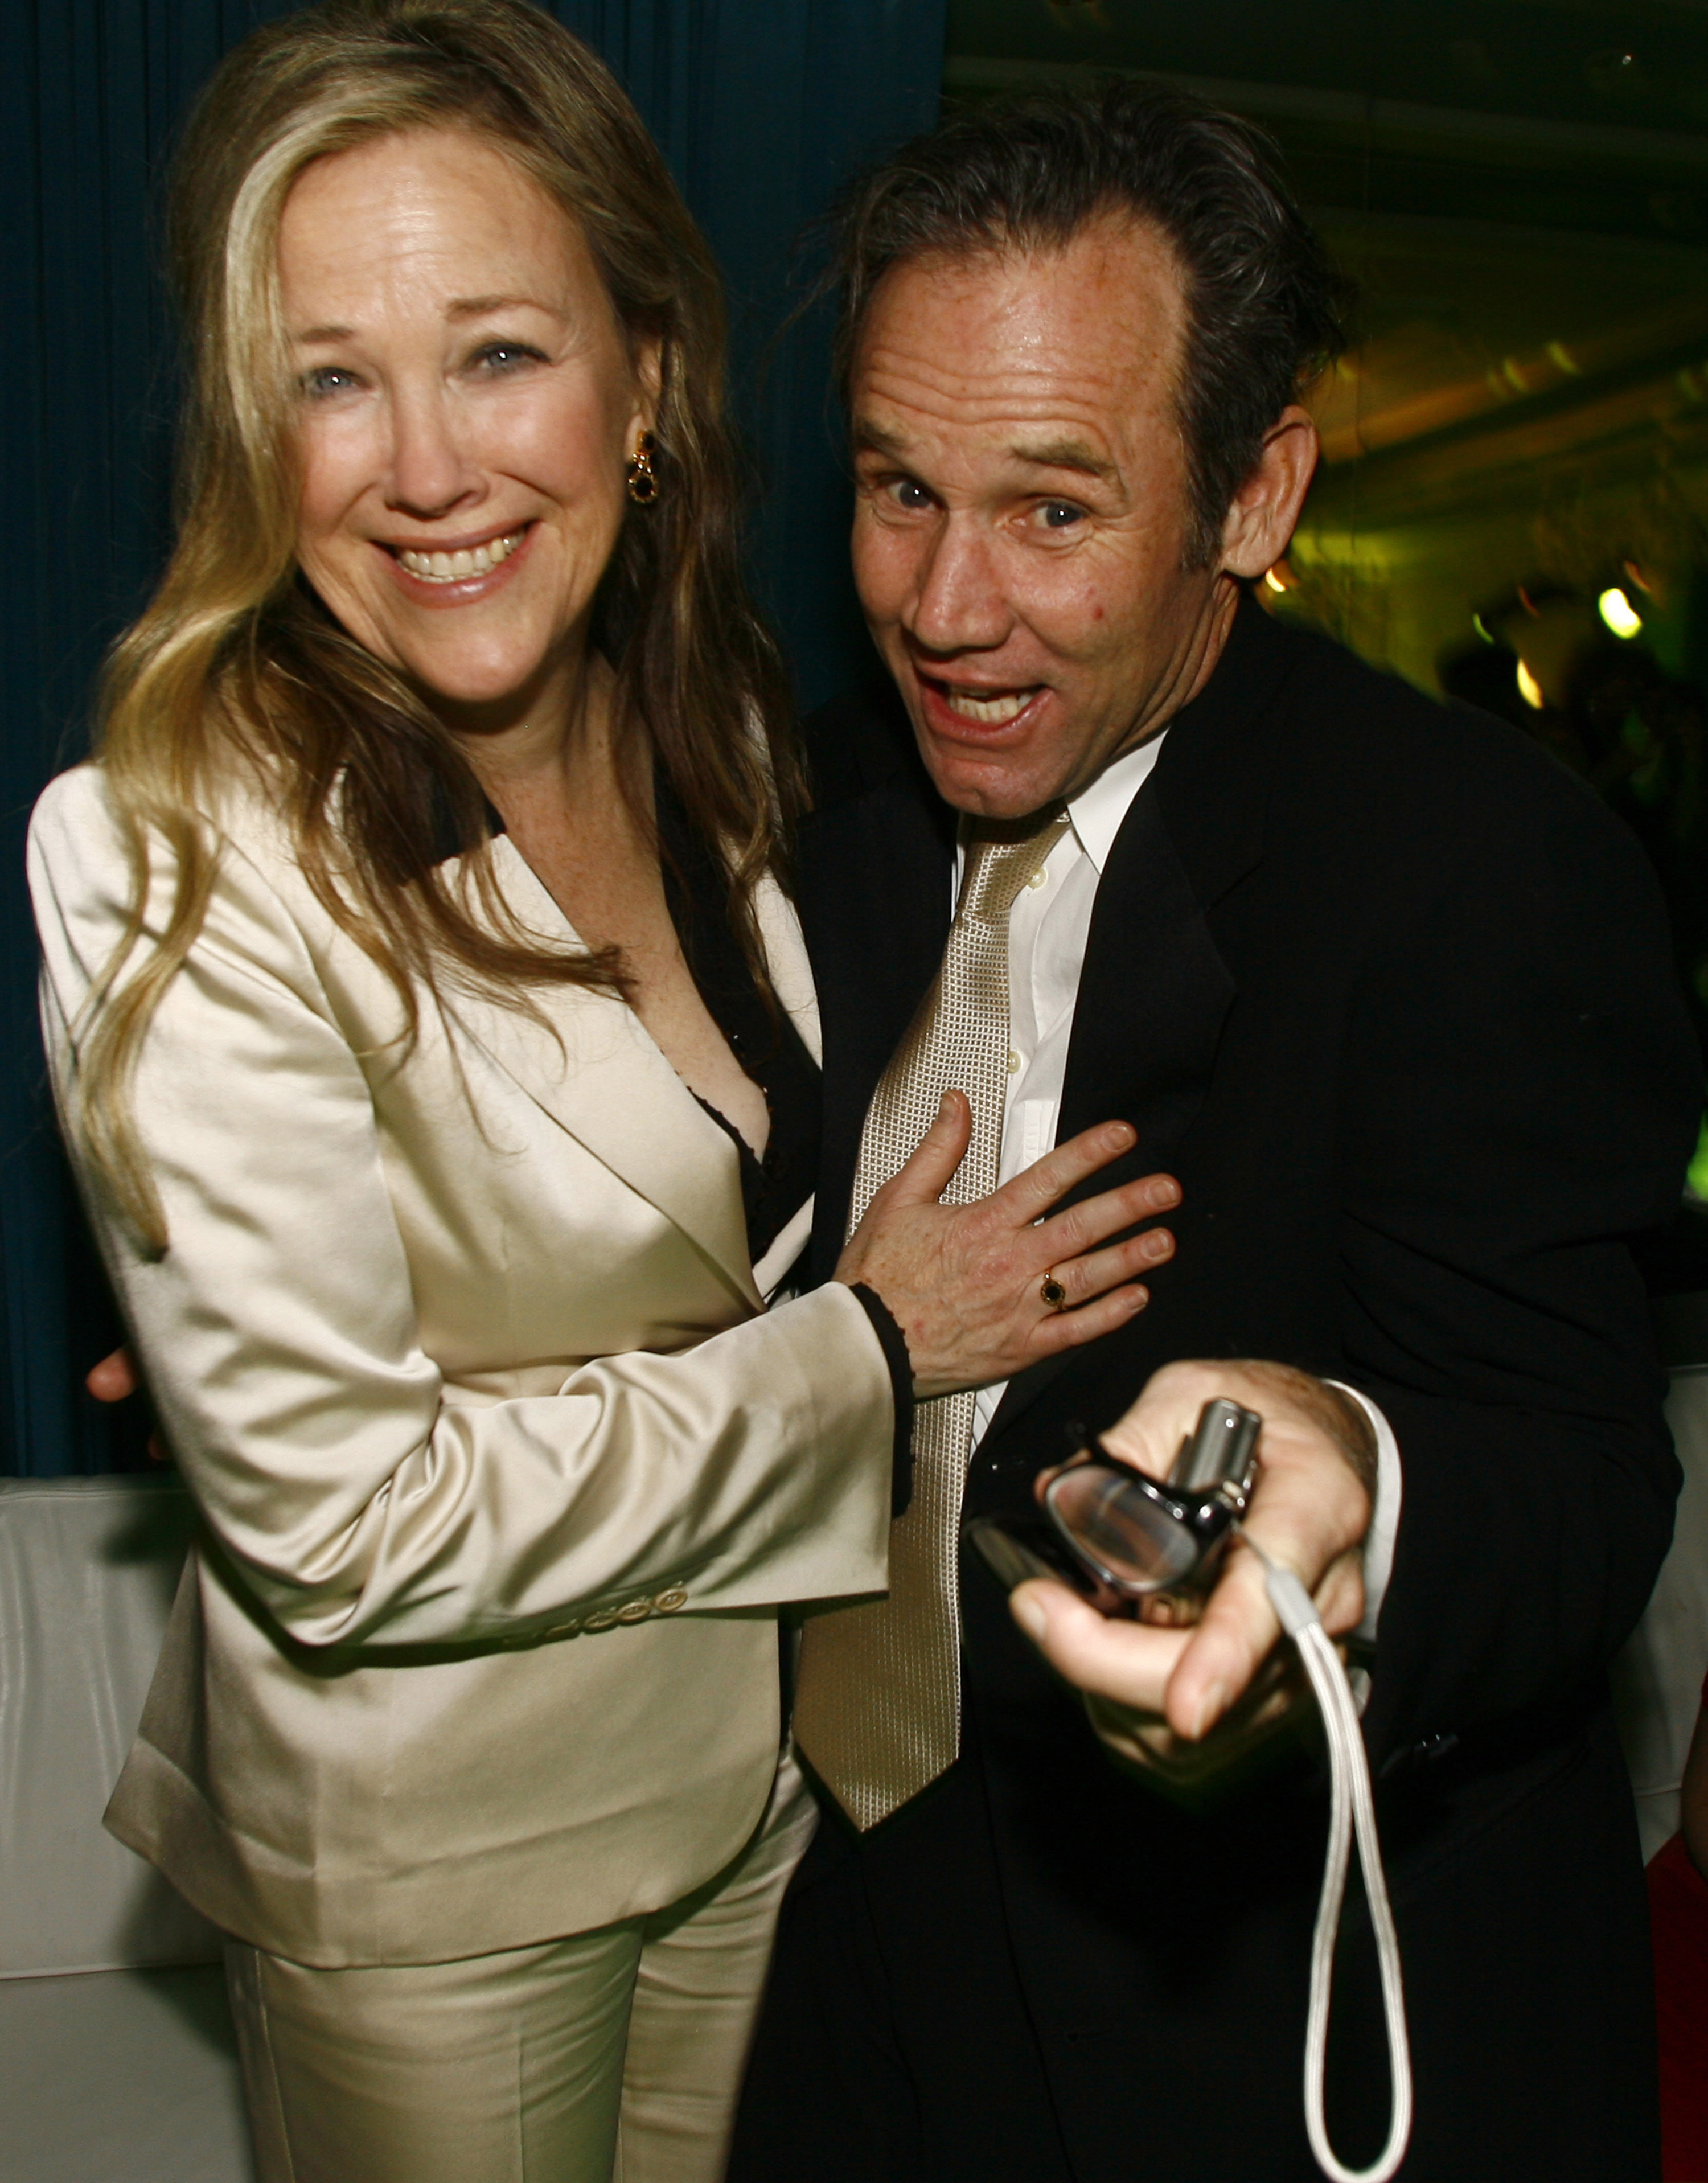 Catherine O'Hara and Bo Welch during the 12th Annual Critics' Choice Awards after party at Viceroy Hotel on January 12, 2007 in Santa Monica, California | Source: Getty Images